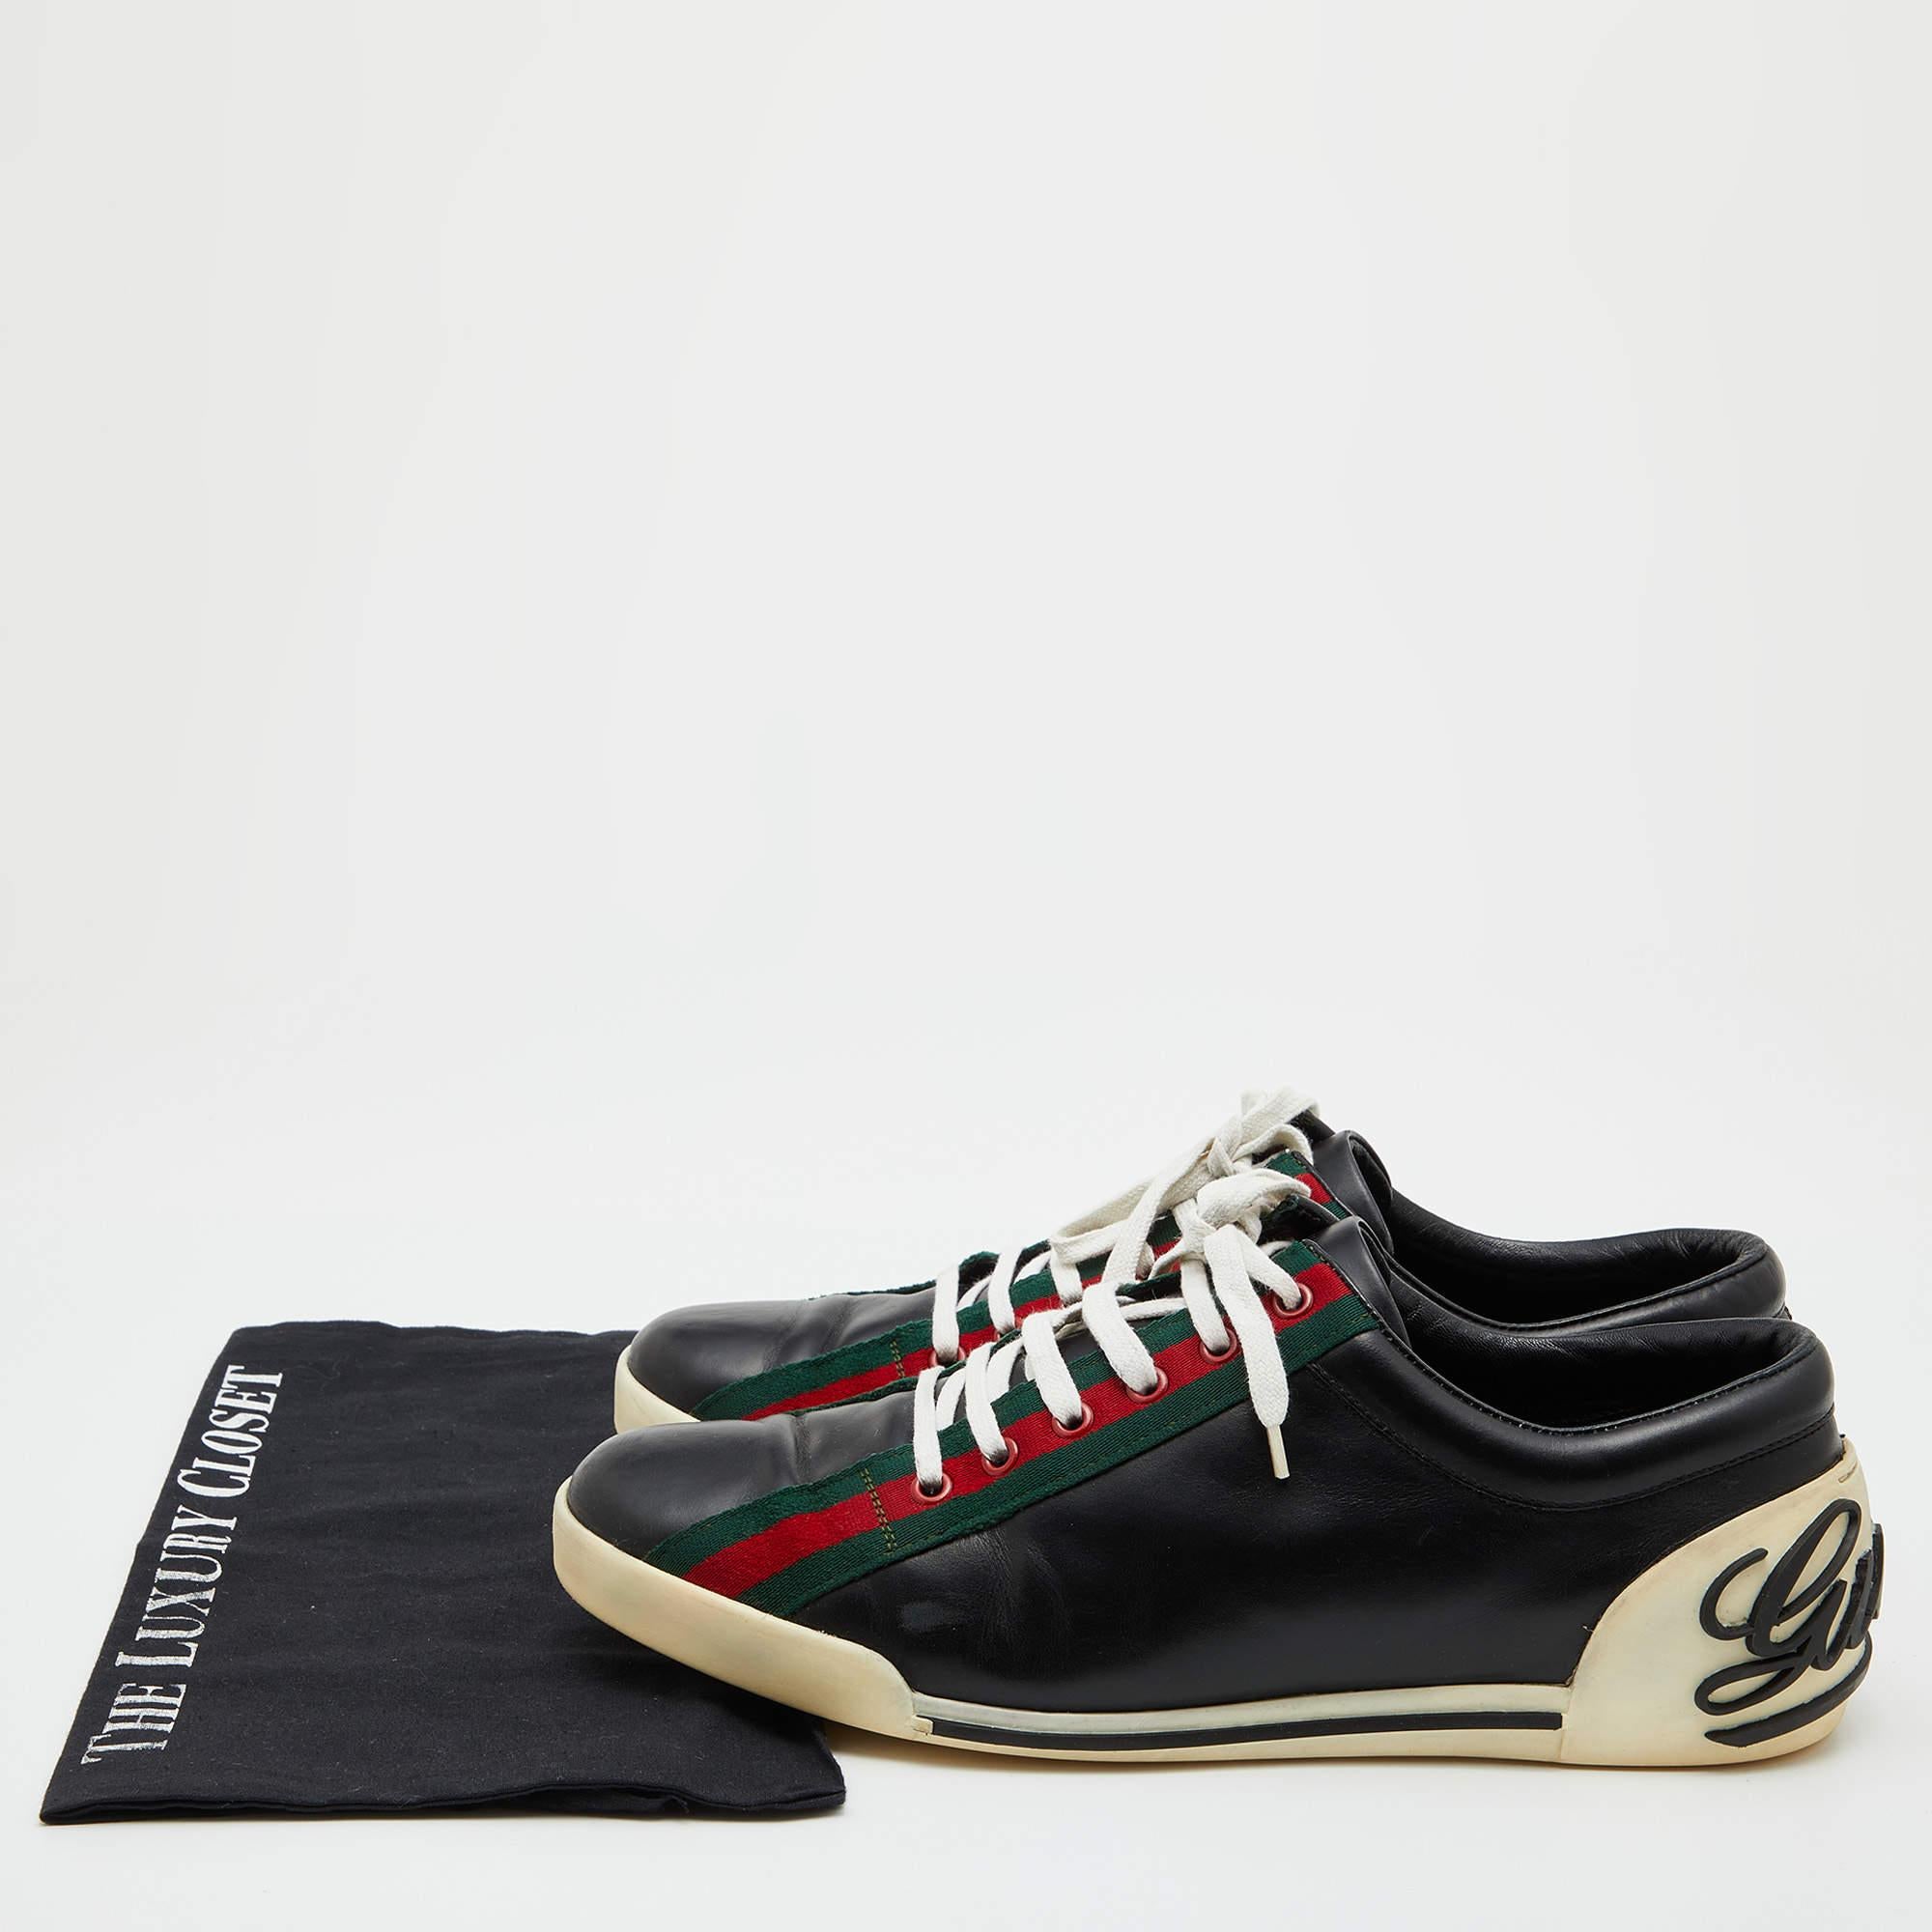 Gucci Black Leather Web Detail Low Top Sneakers Size 43 3